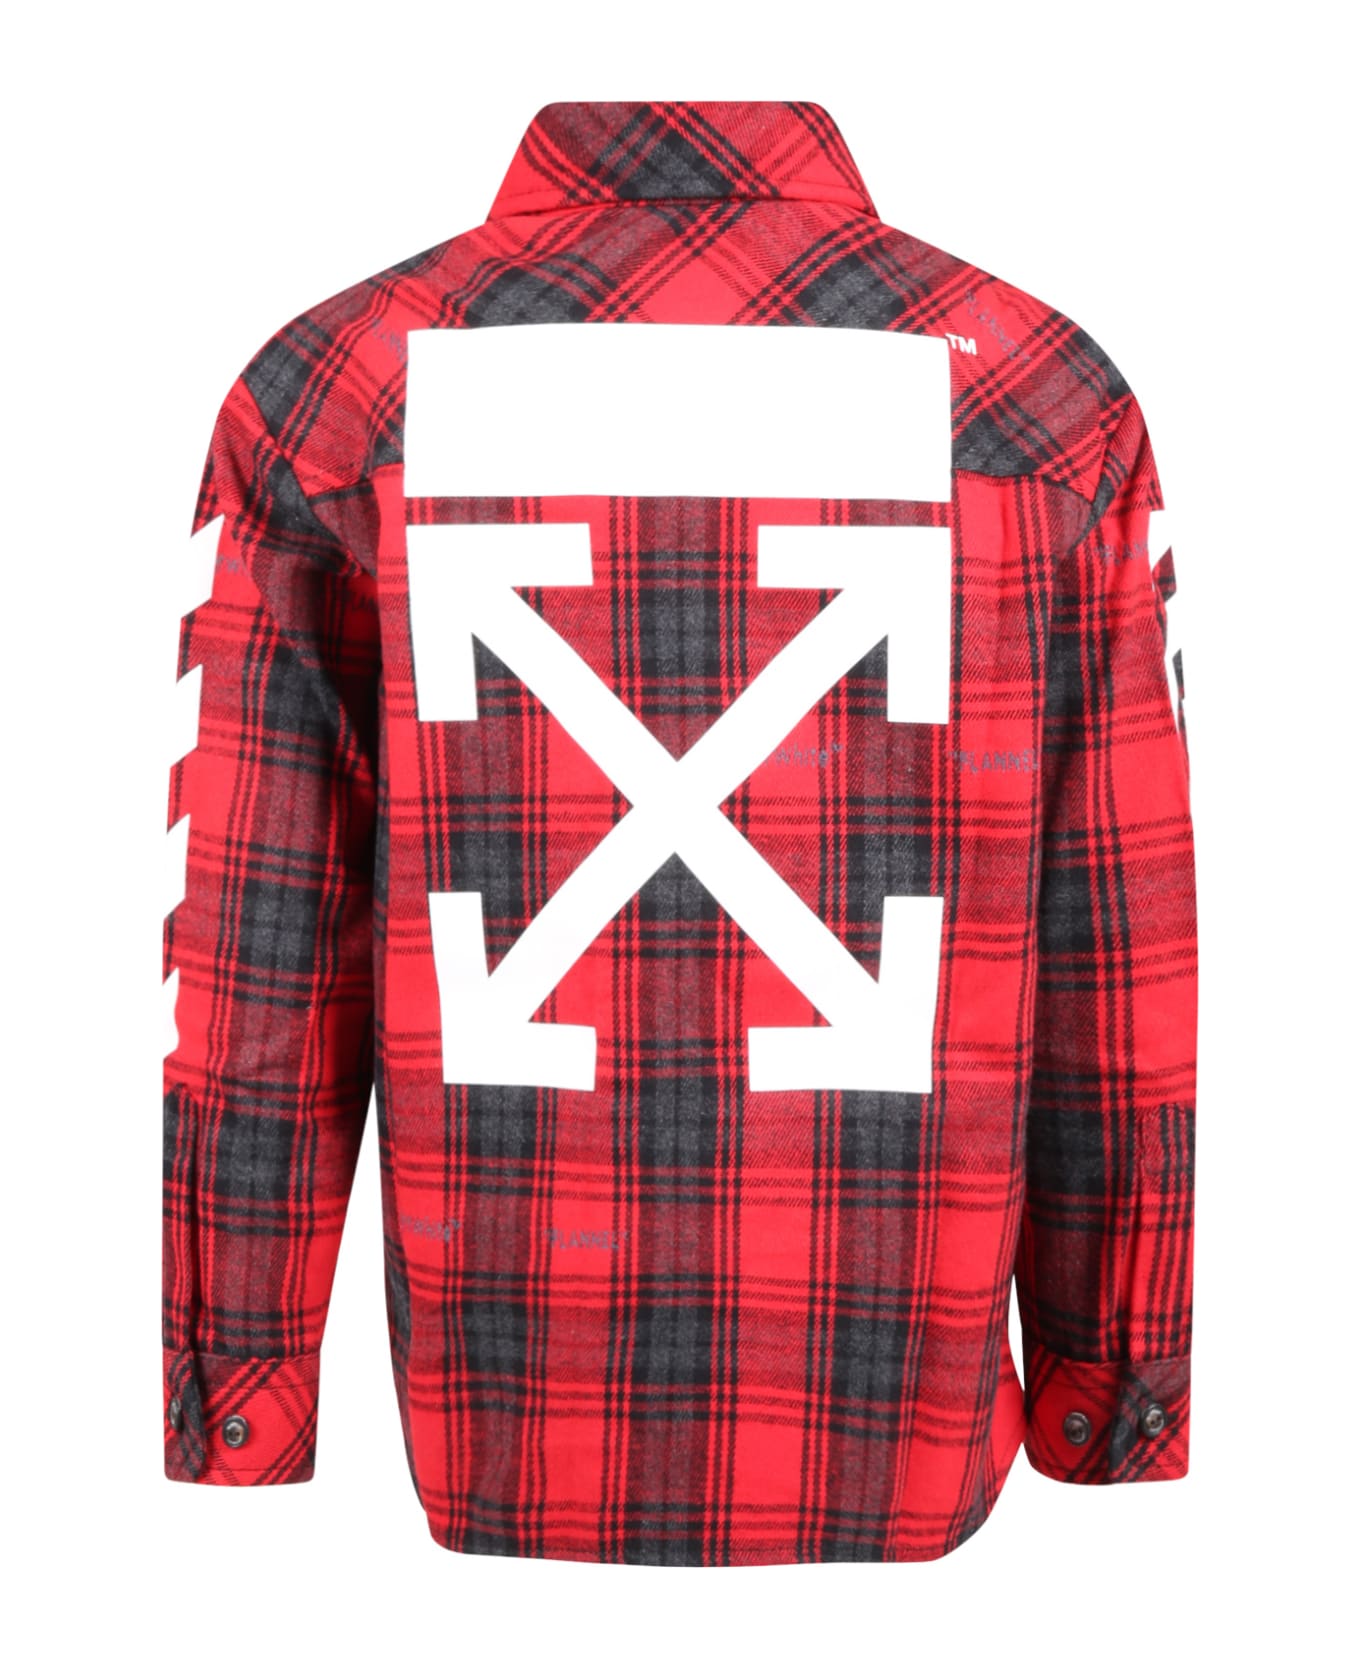 Off-White Multicolor Shirt For Boy With Logos - Red